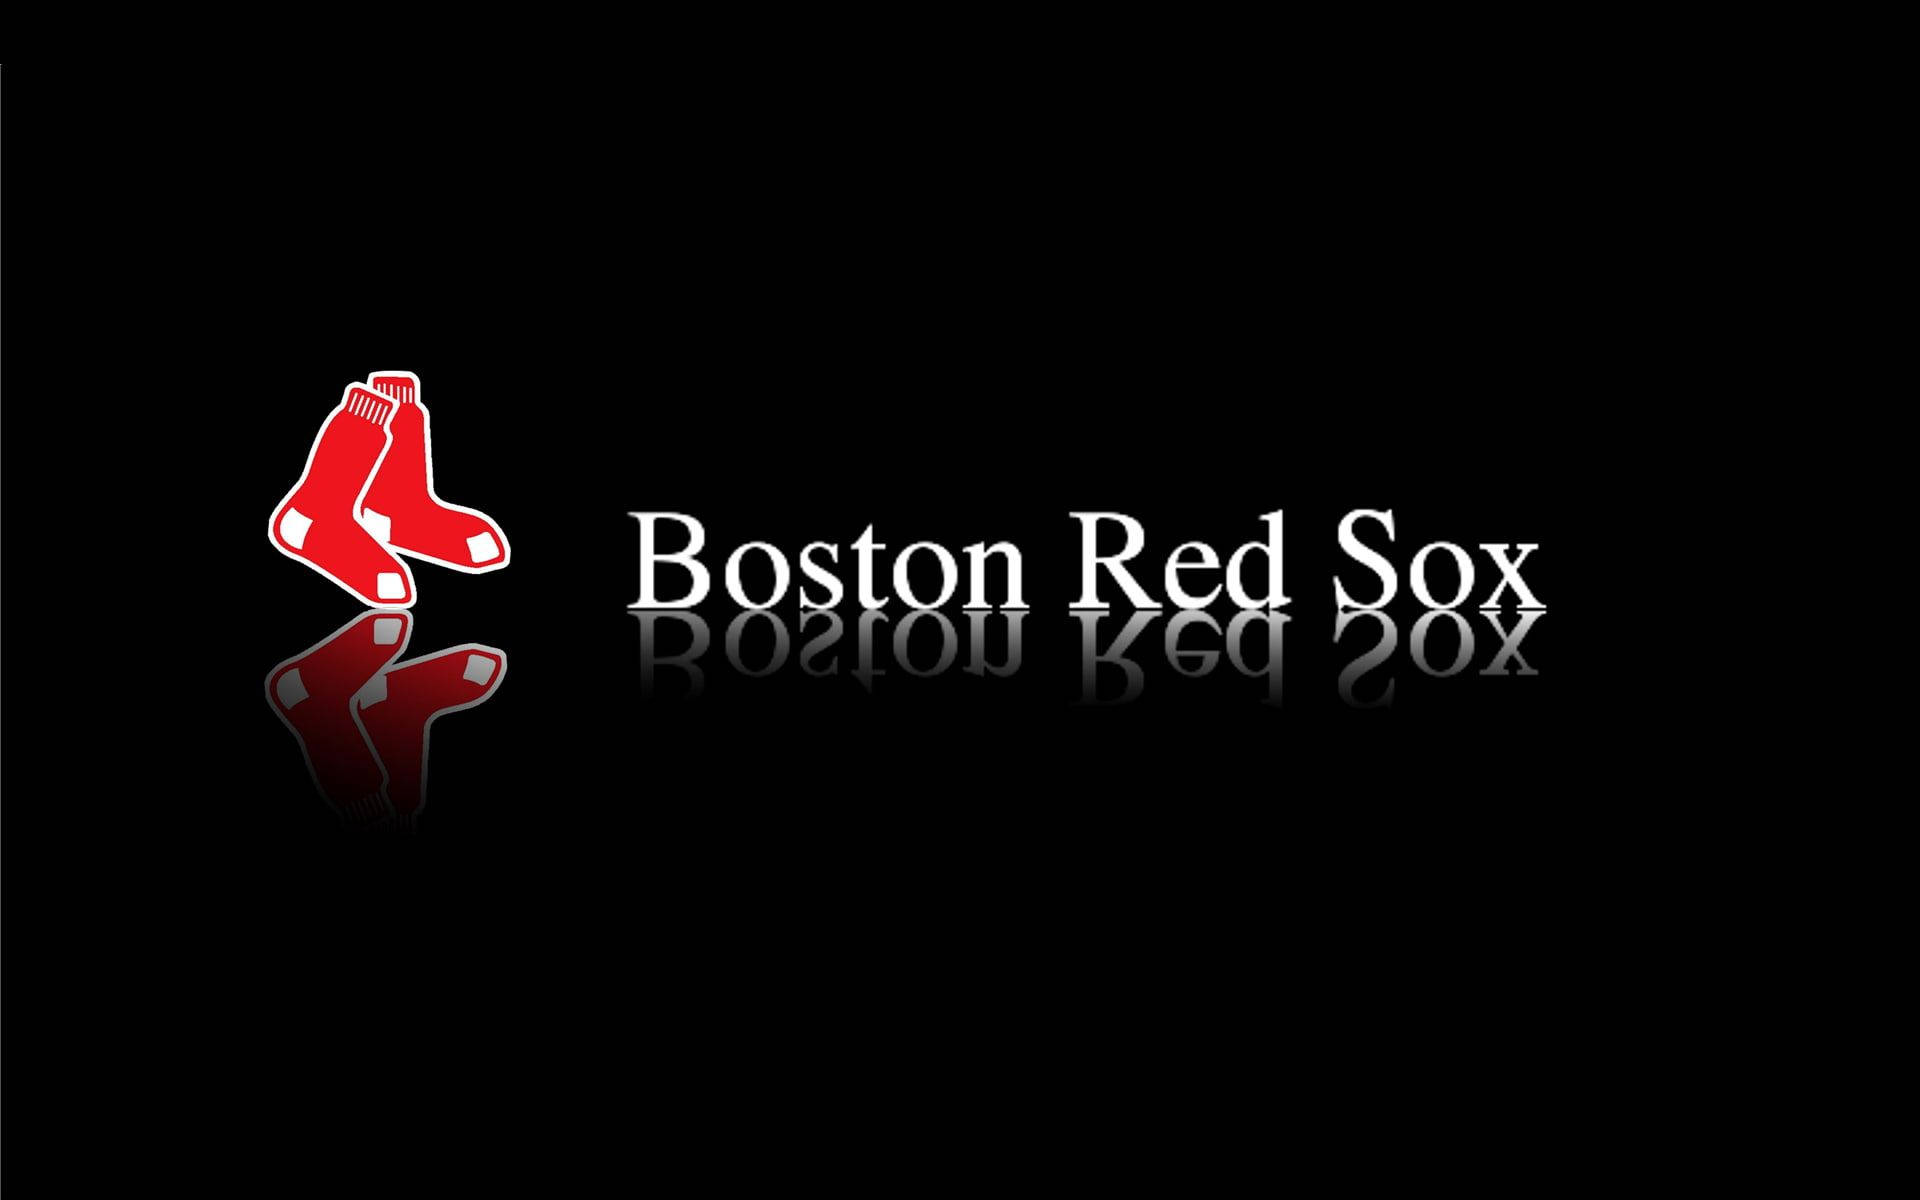 Boston Red Sox Title Card Background